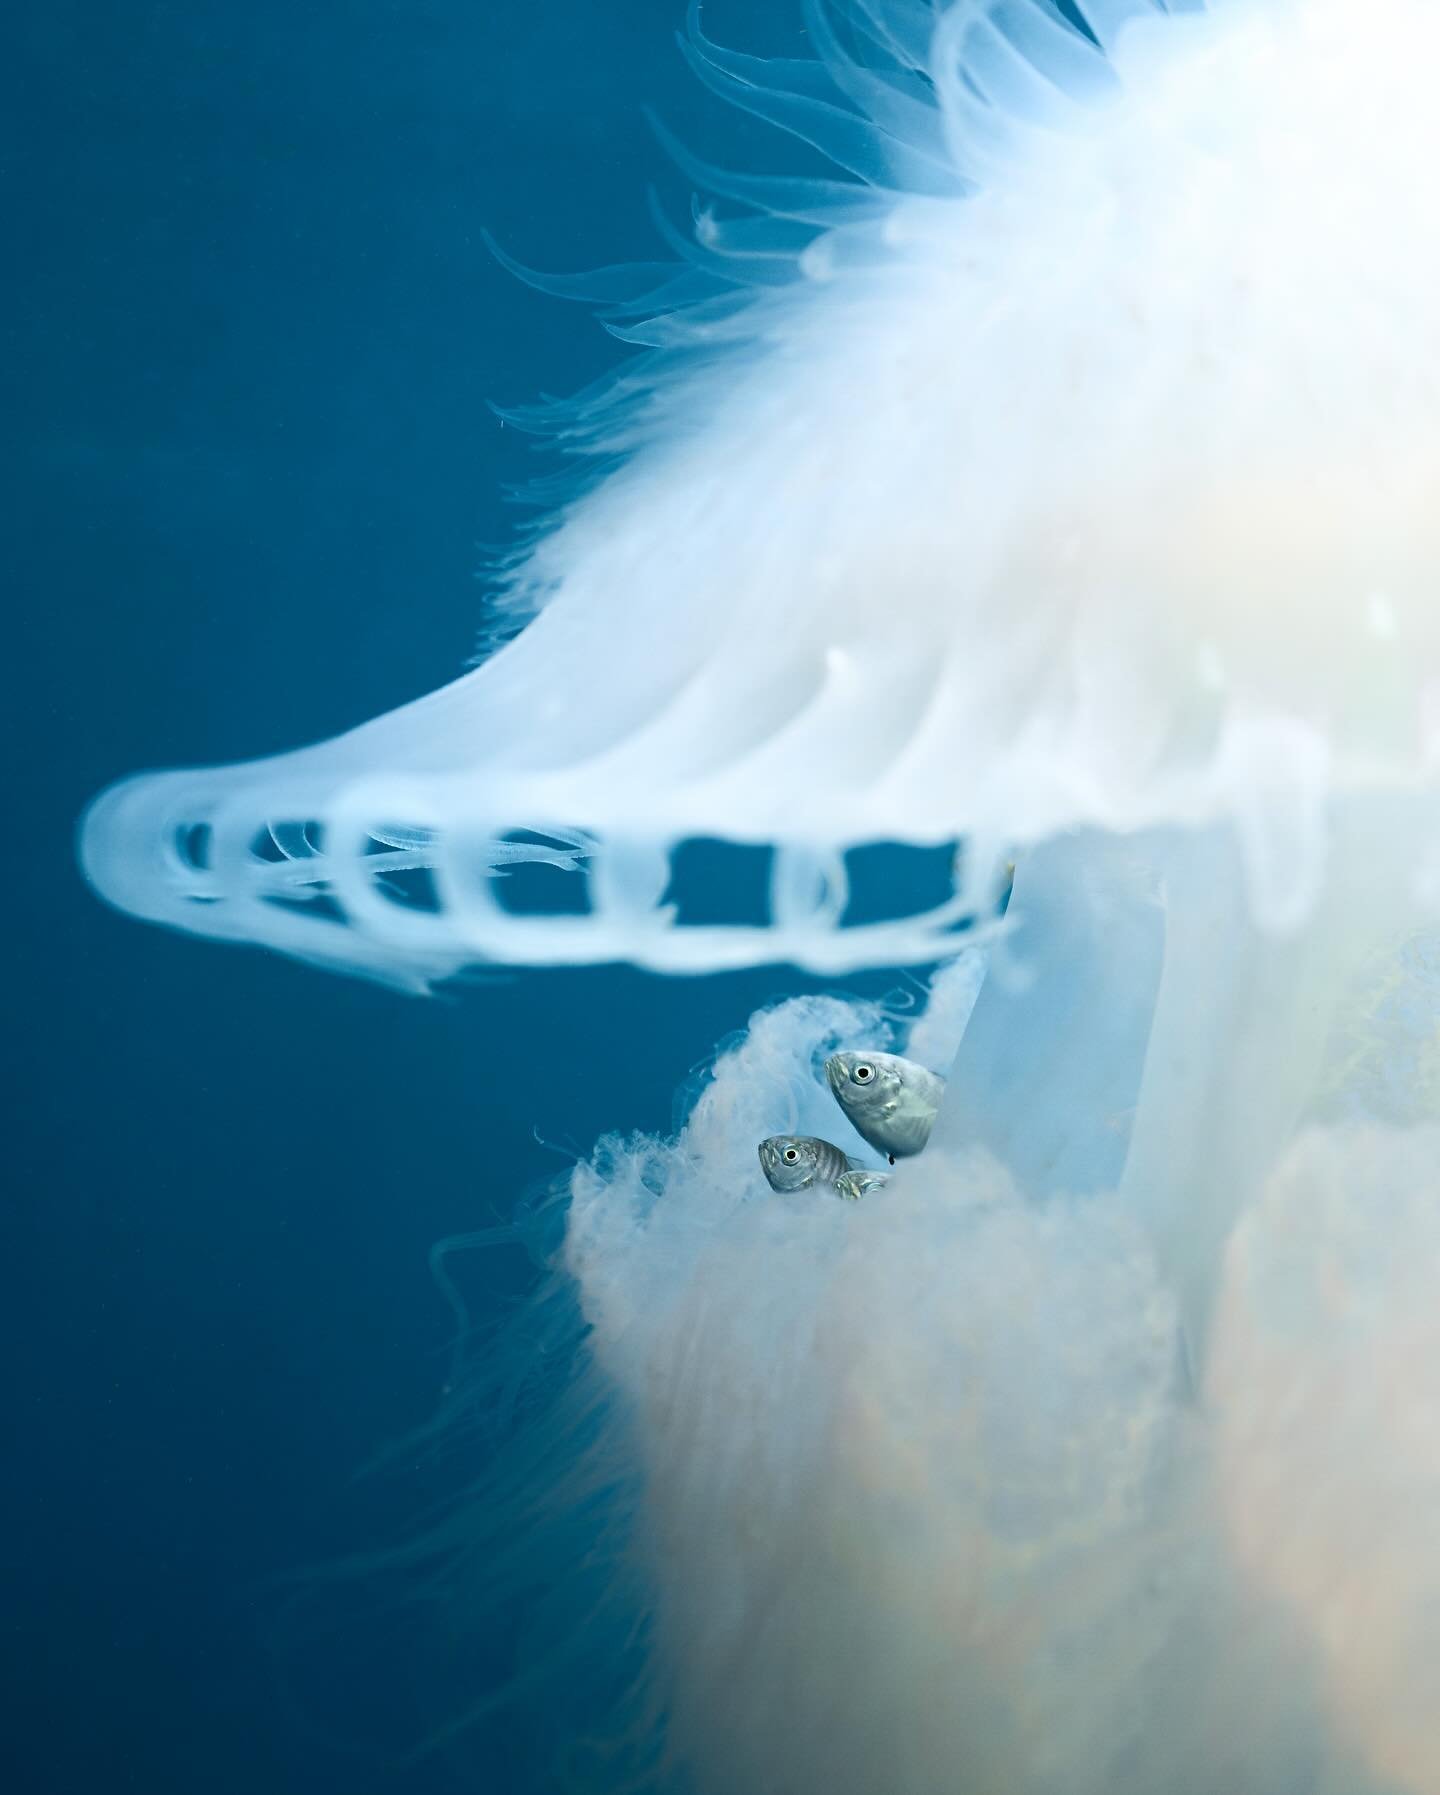 Fish hide beneath the bell of a jellyfish floating off the coast of Thailand. While the abundance of these stinging cnidaria is often overlooked &ndash; especially during the rainy season &ndash; paying closer attention reveals weirdly unique and won